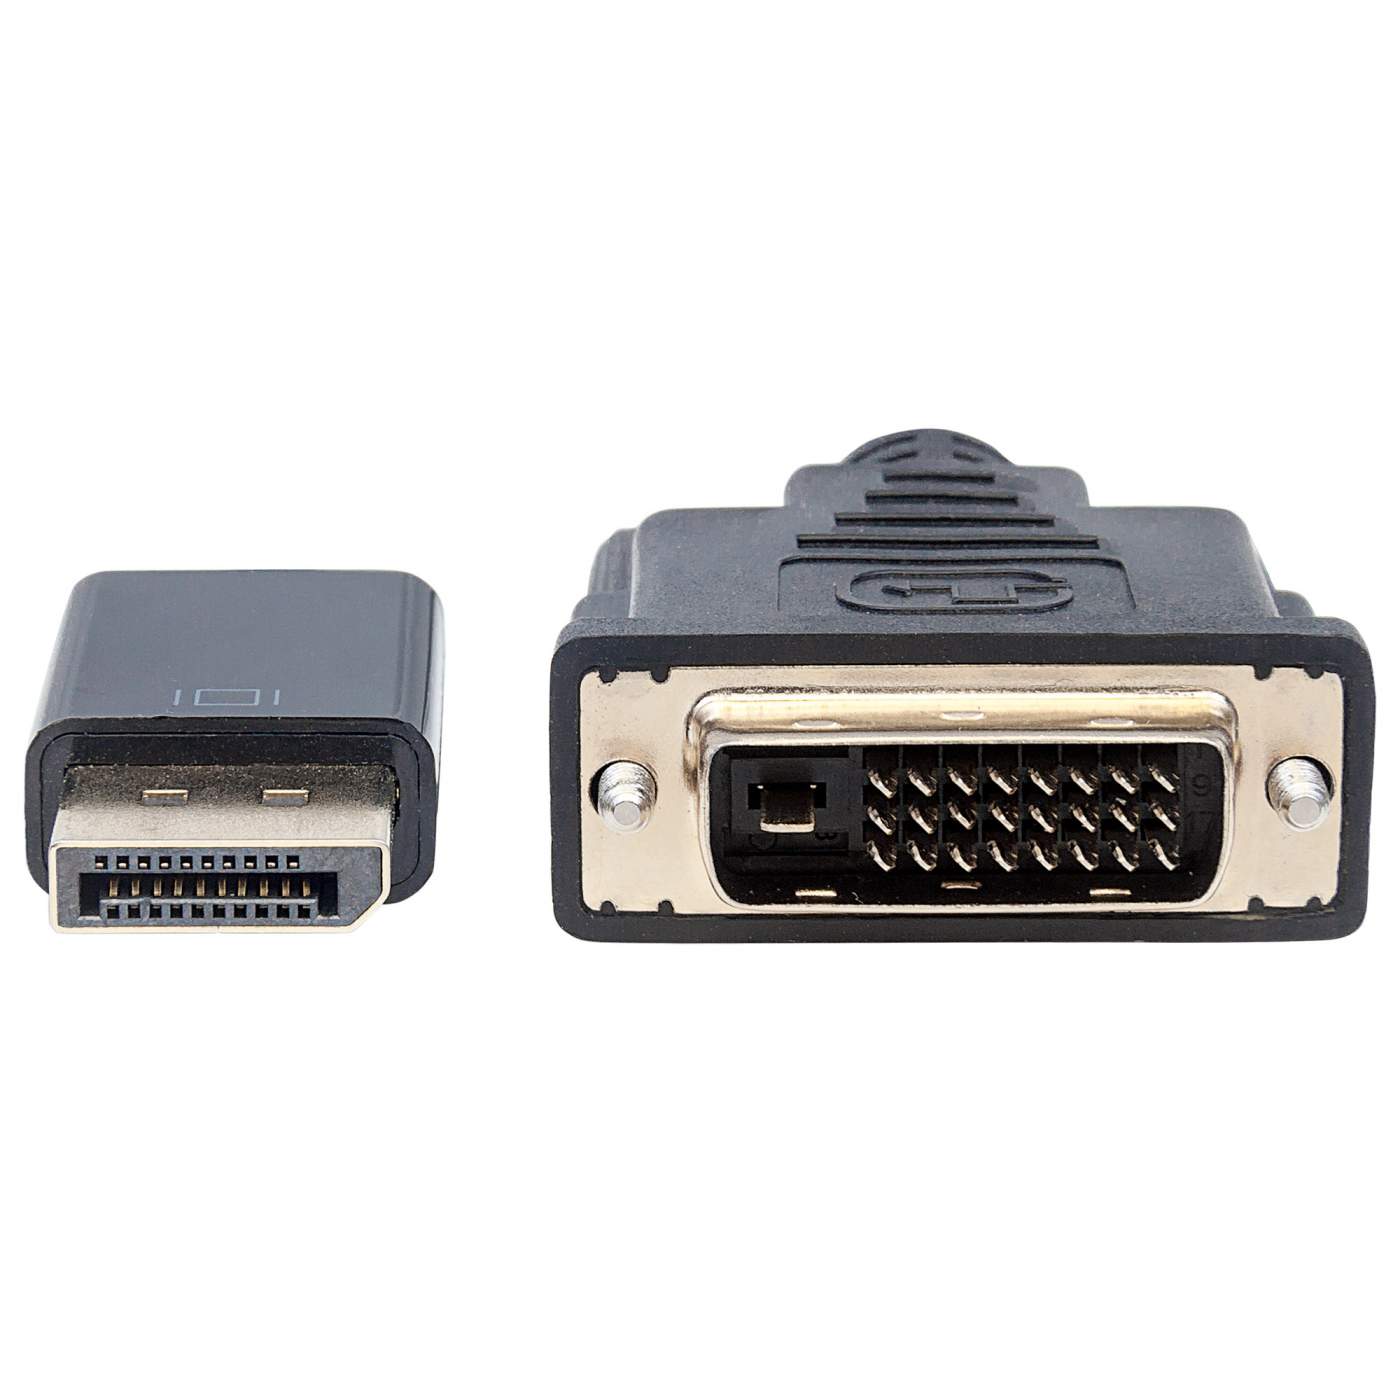 DisplayPort 1.2a to DVI Cable Image 4